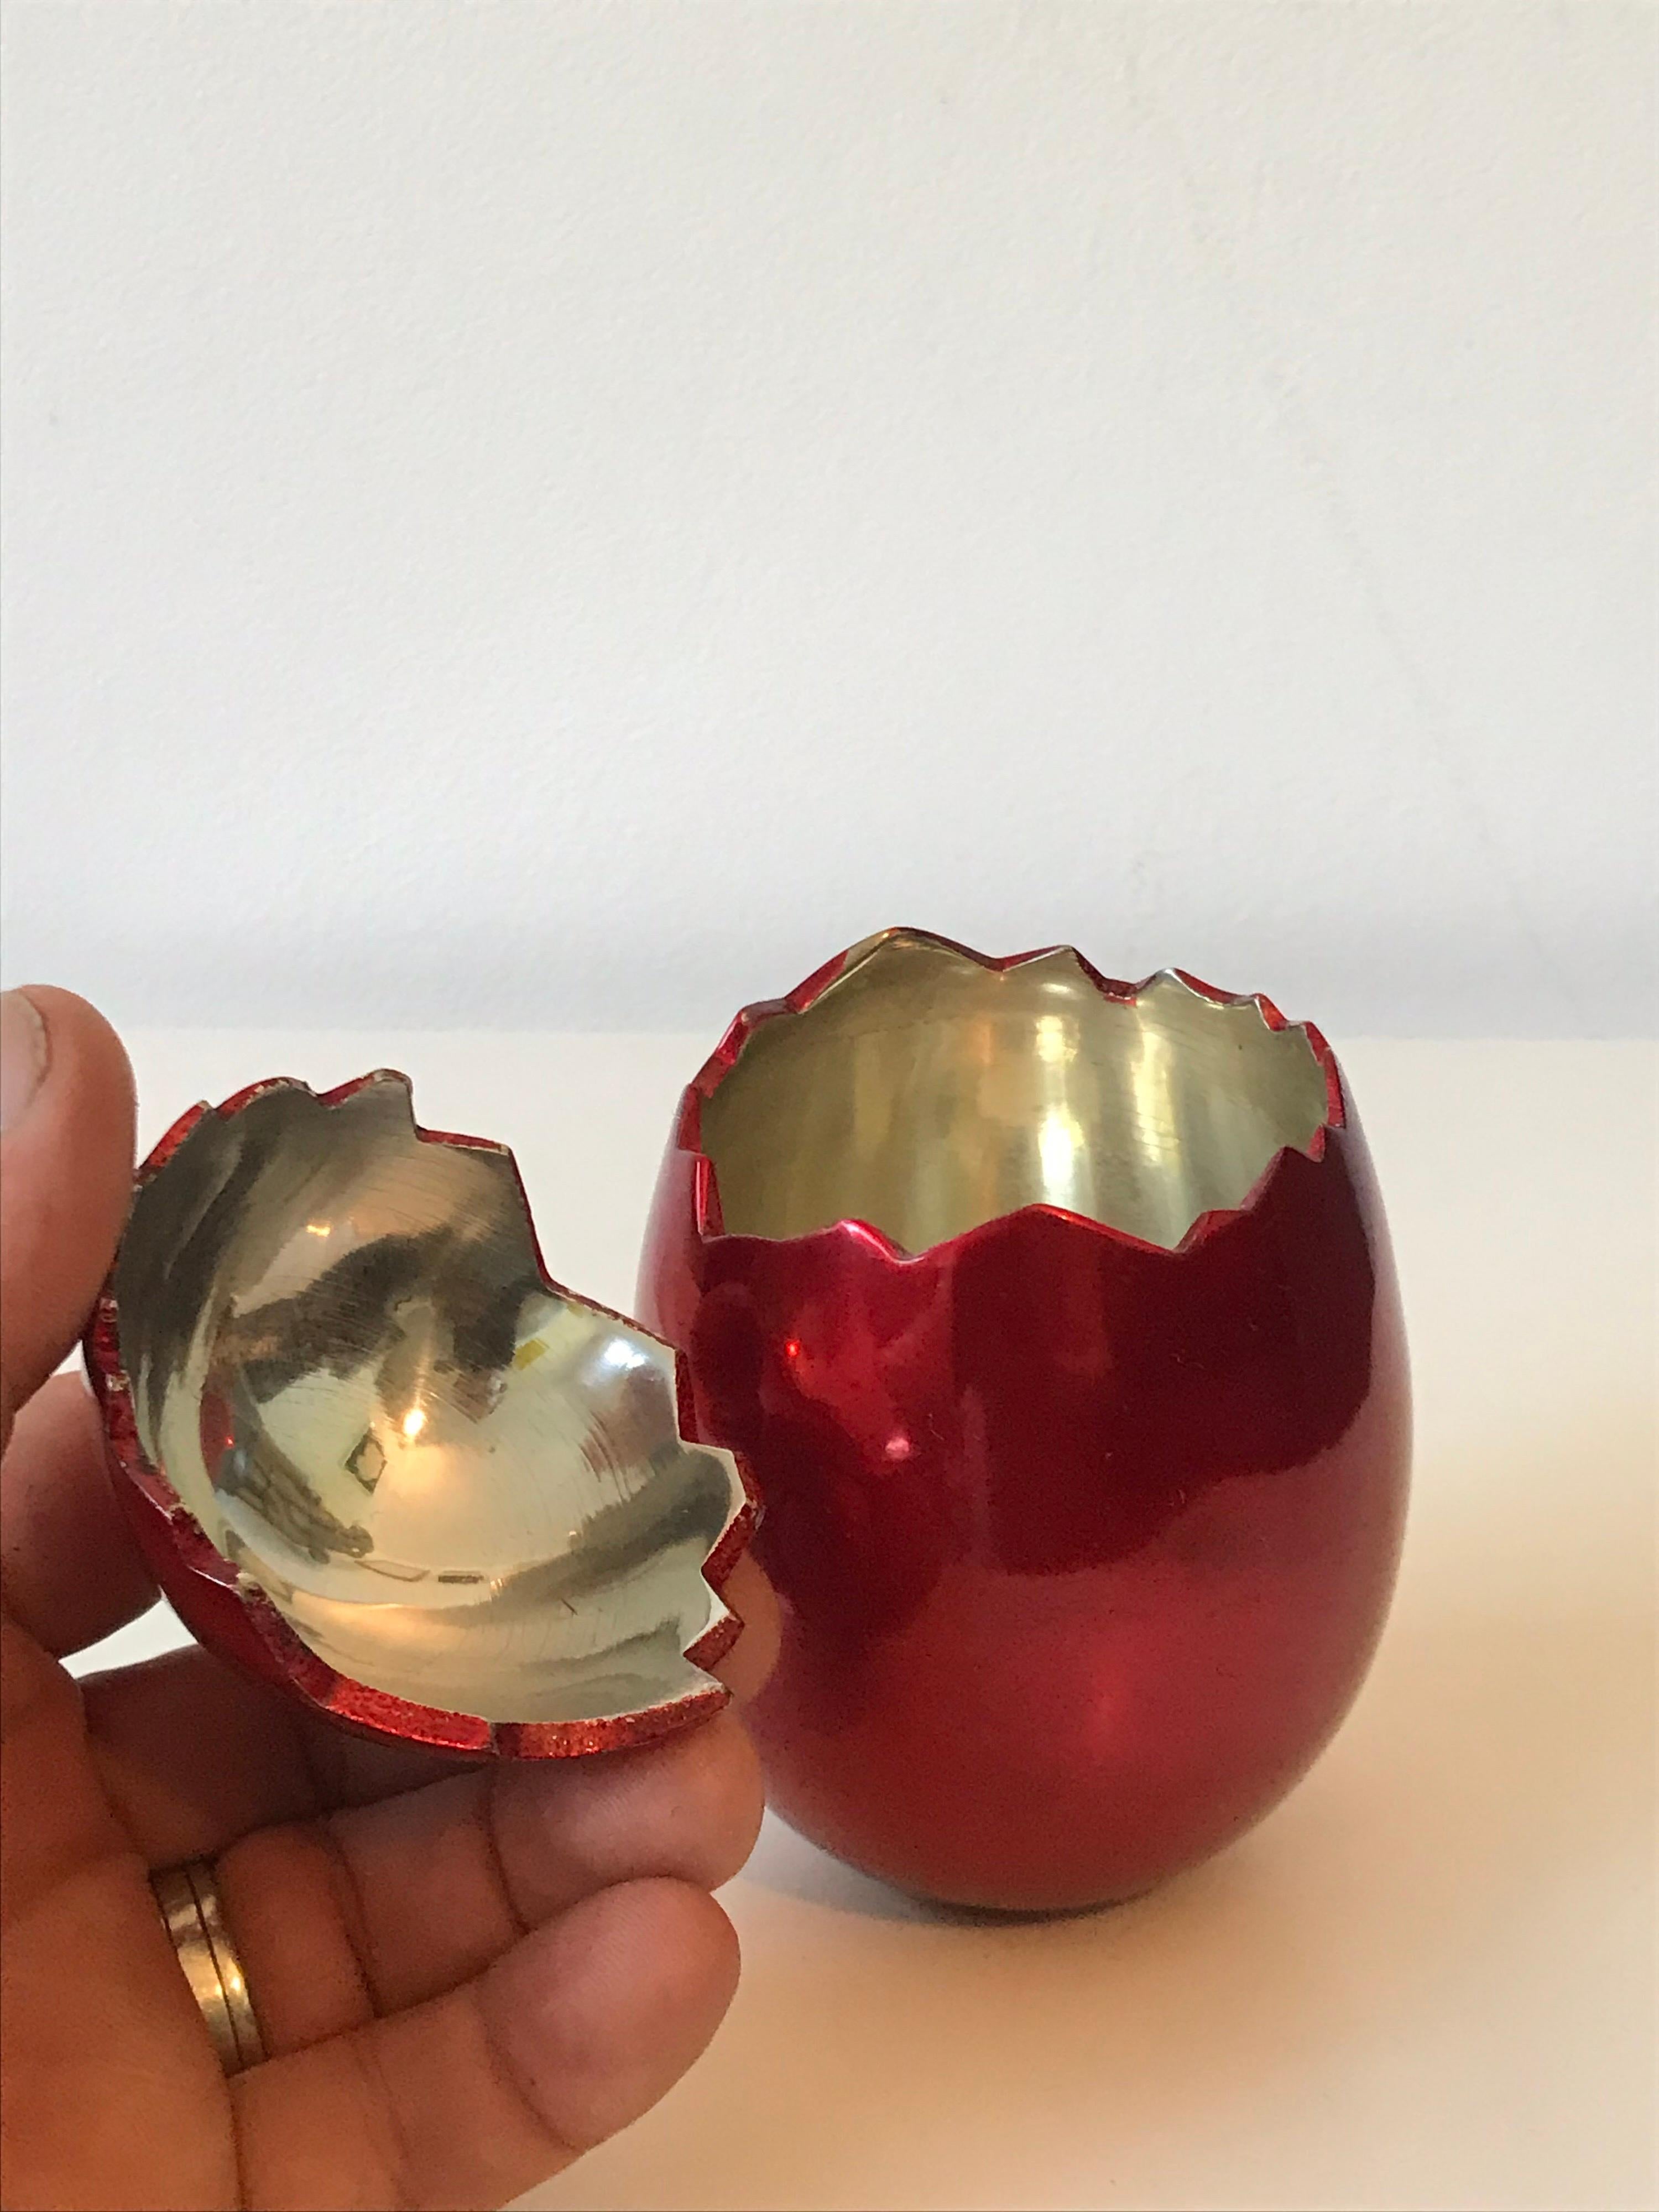 Contemporary After Jeff Koons Small Cracked Egg Sculpture Invitation, 2008